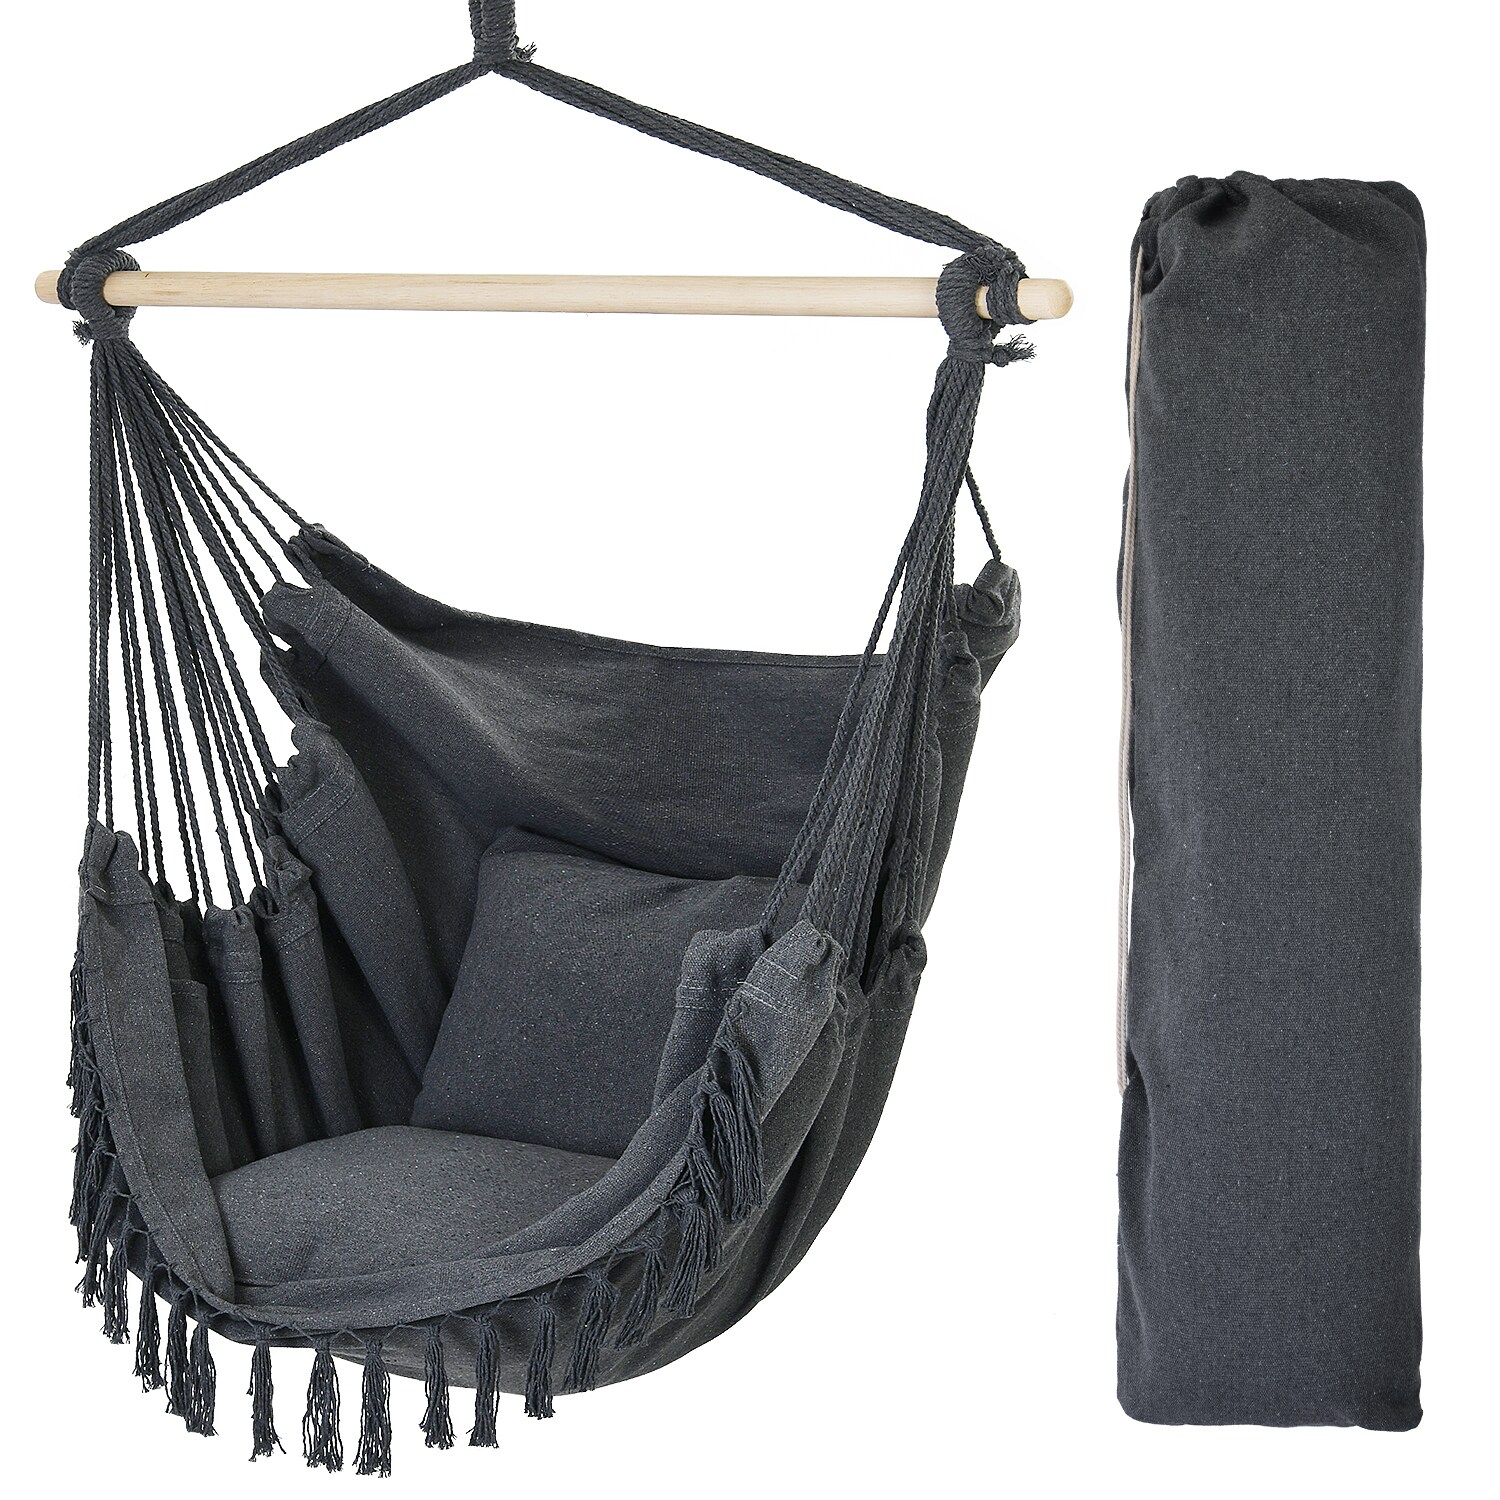 frozen Courageous Exceed Hammocks Gray Woven Hammock Chair in the Hammocks department at Lowes.com